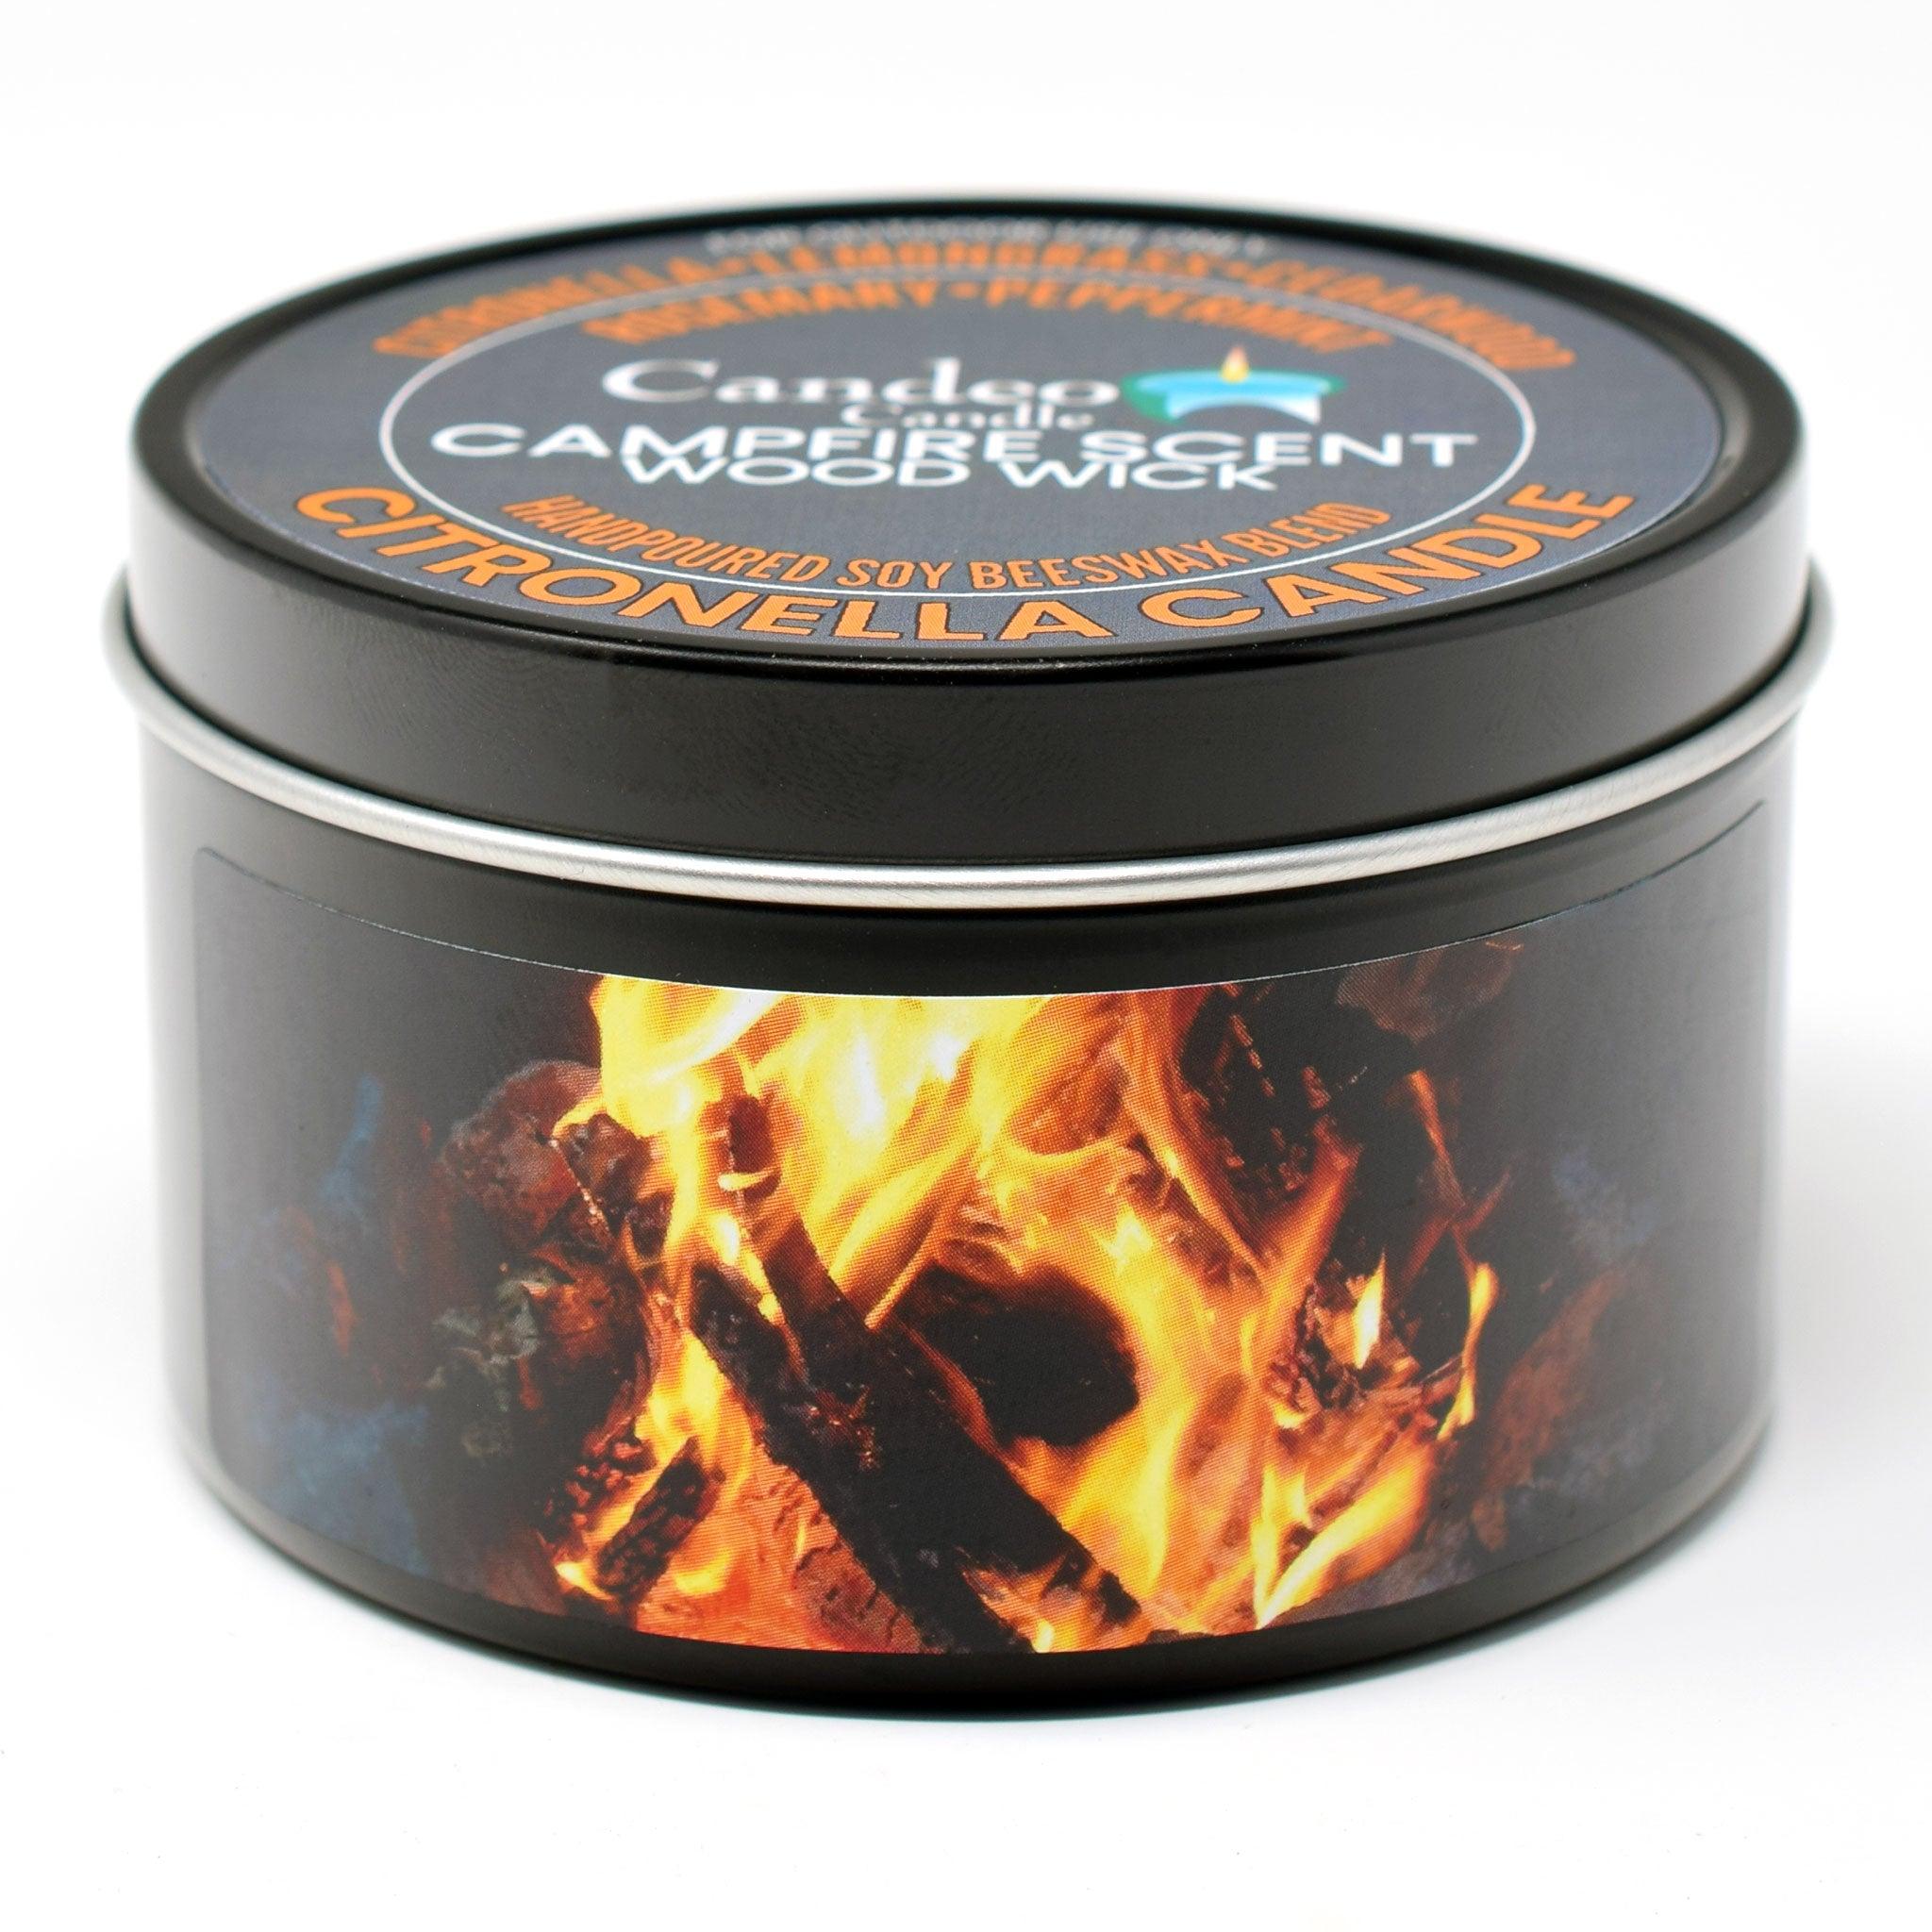 Citronella Campfire Candle, Soy/Beeswax Blend, Wood Wick, 6oz Black Tin - Candeo Candle